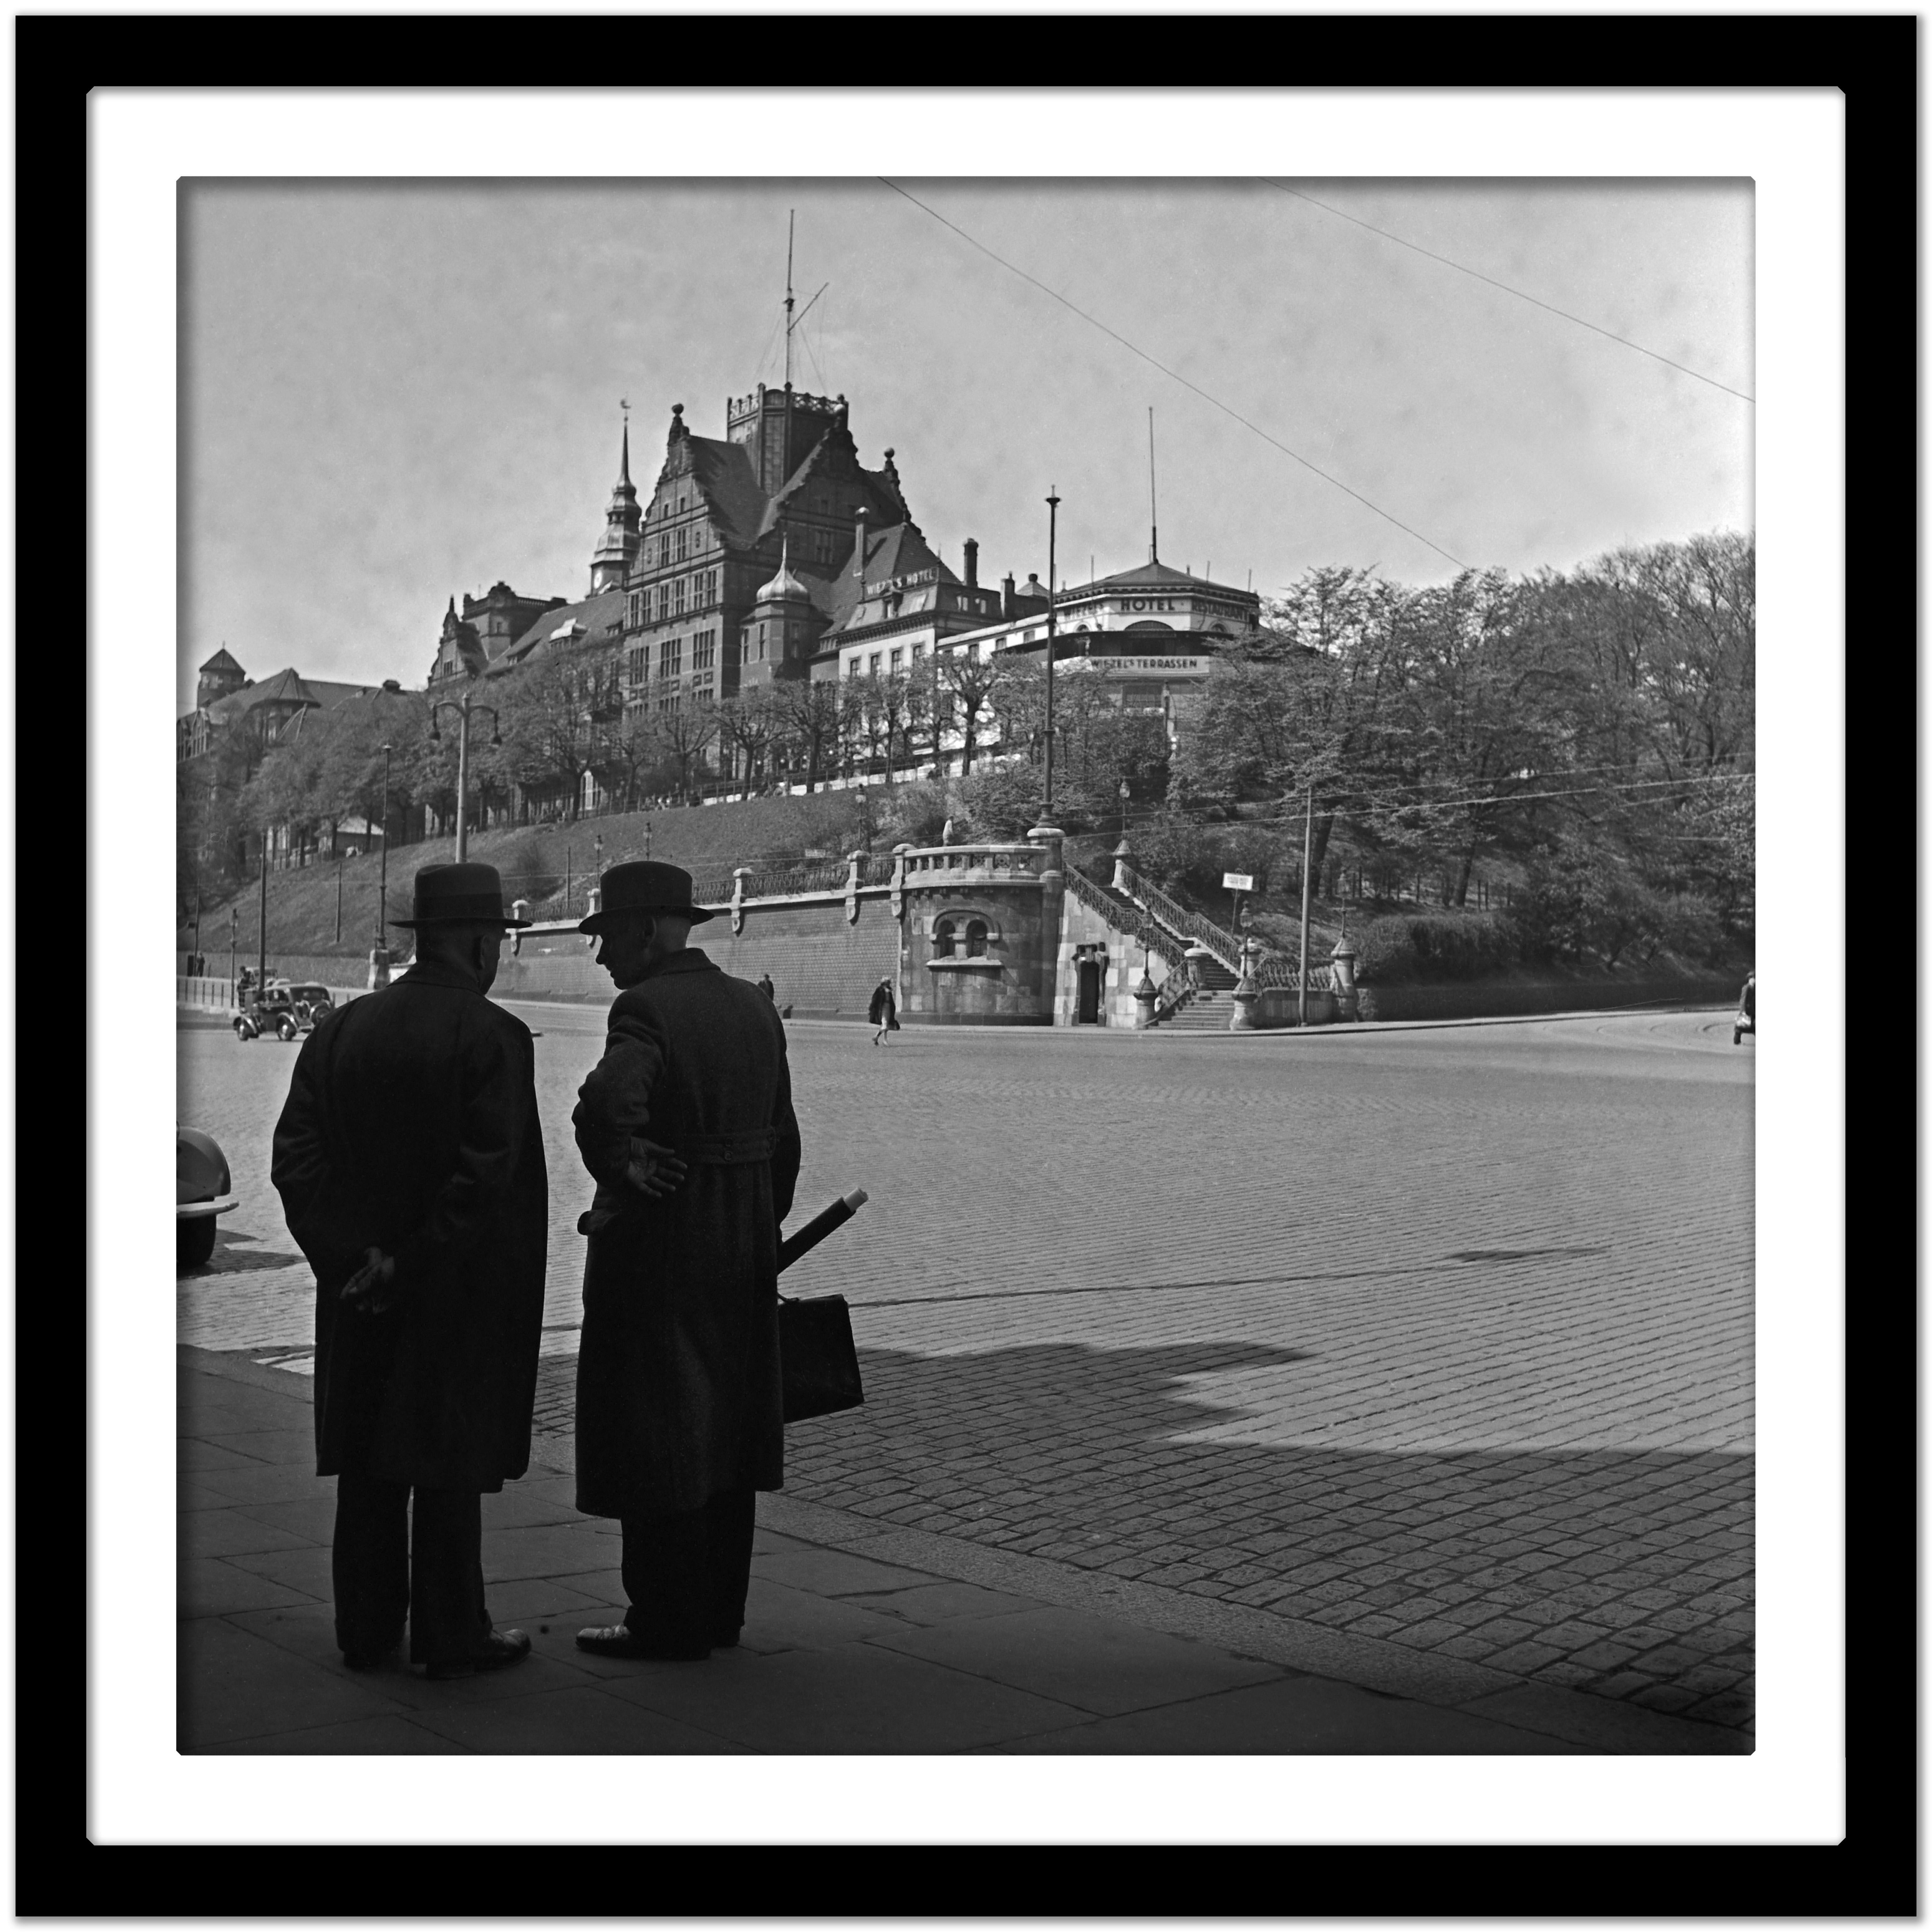 Harbor hospital at Hamburg St. Pauli and People, Germany 1938, Printed Later  - Modern Photograph by Karl Heinrich Lämmel